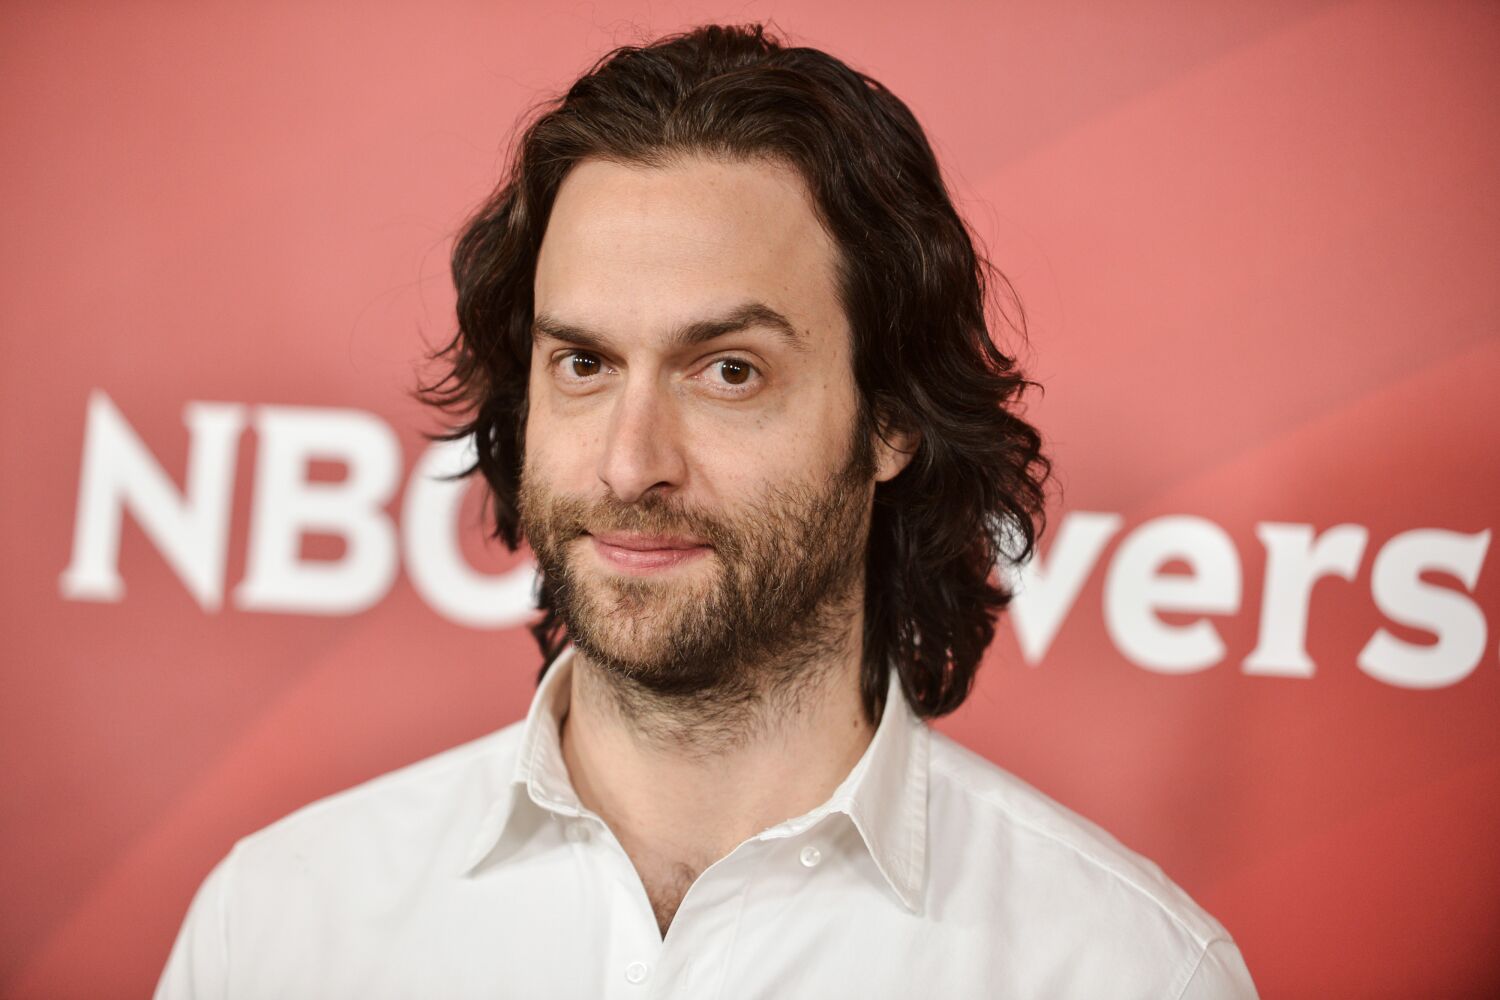 Multiple women accuse comedian Chris D'Elia of sexual assault and abuse